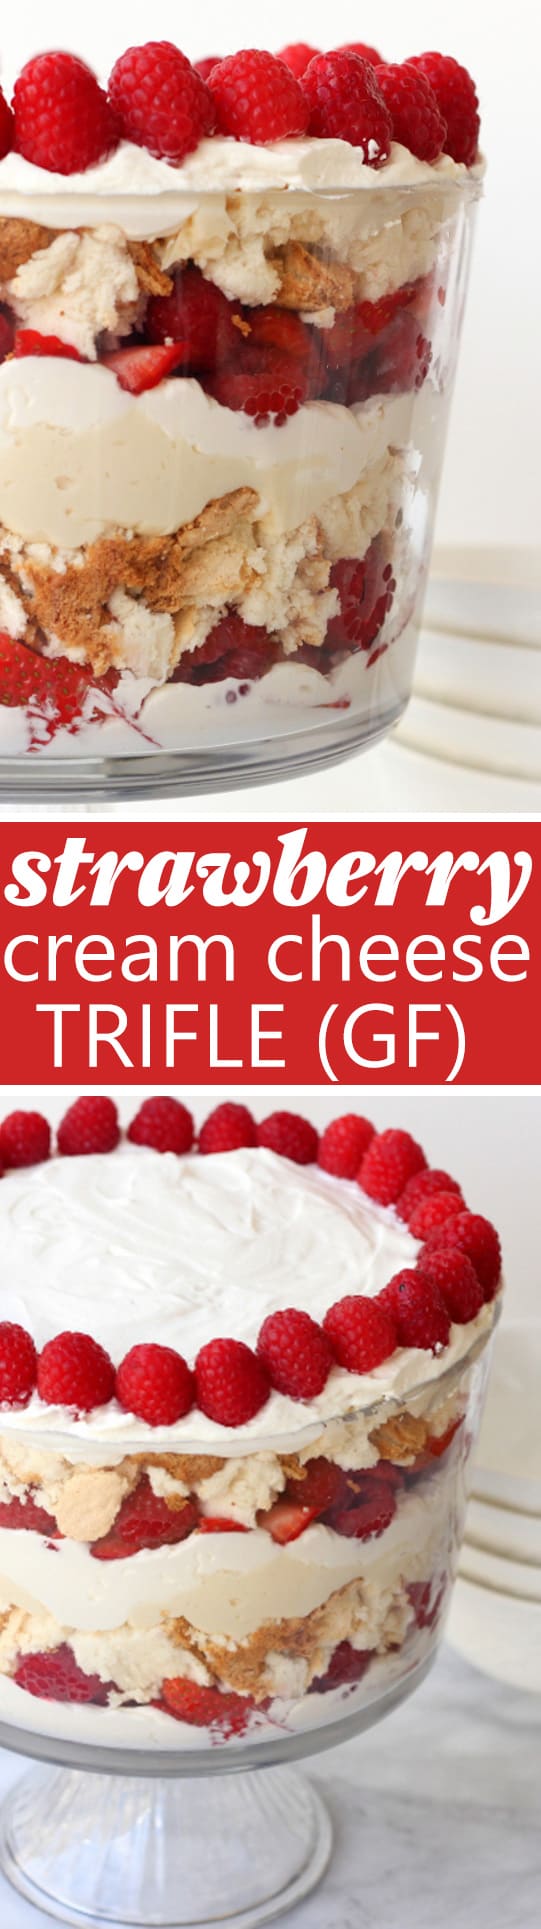 Strawberry Cream Cheese Trifle (Gluten-Free!) Layers of gluten-free angel food cake with fresh berries, whipped cream and cream cheese. Everyone always asks for this recipe!